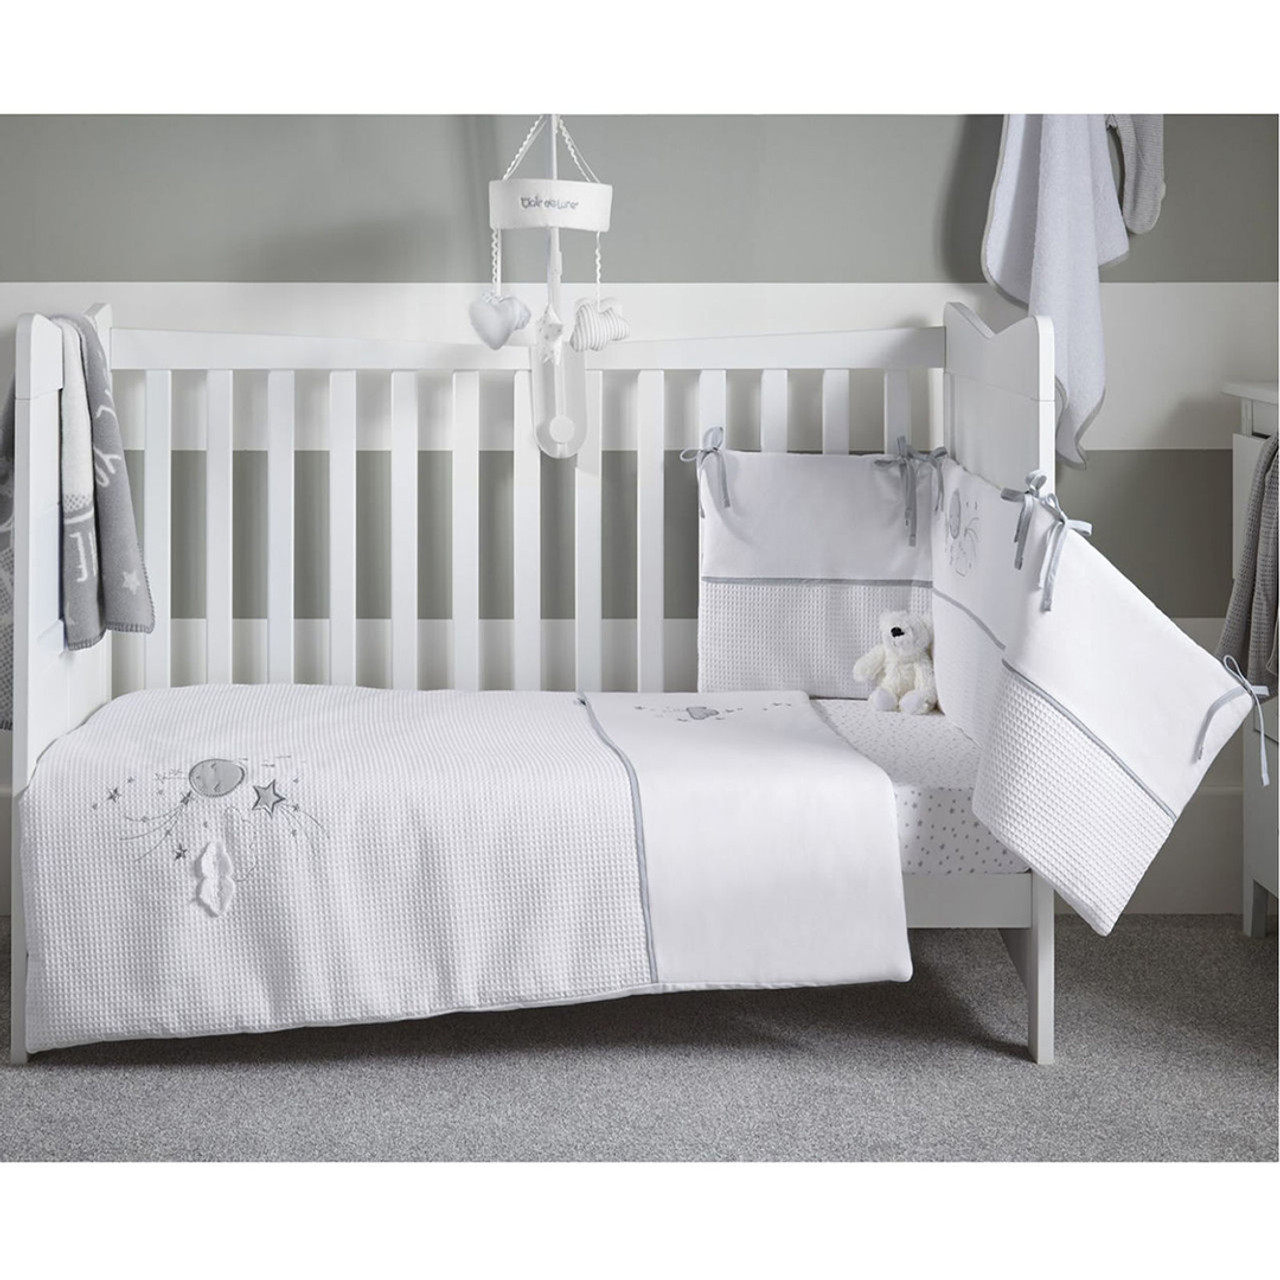 grey and white cot bedding set